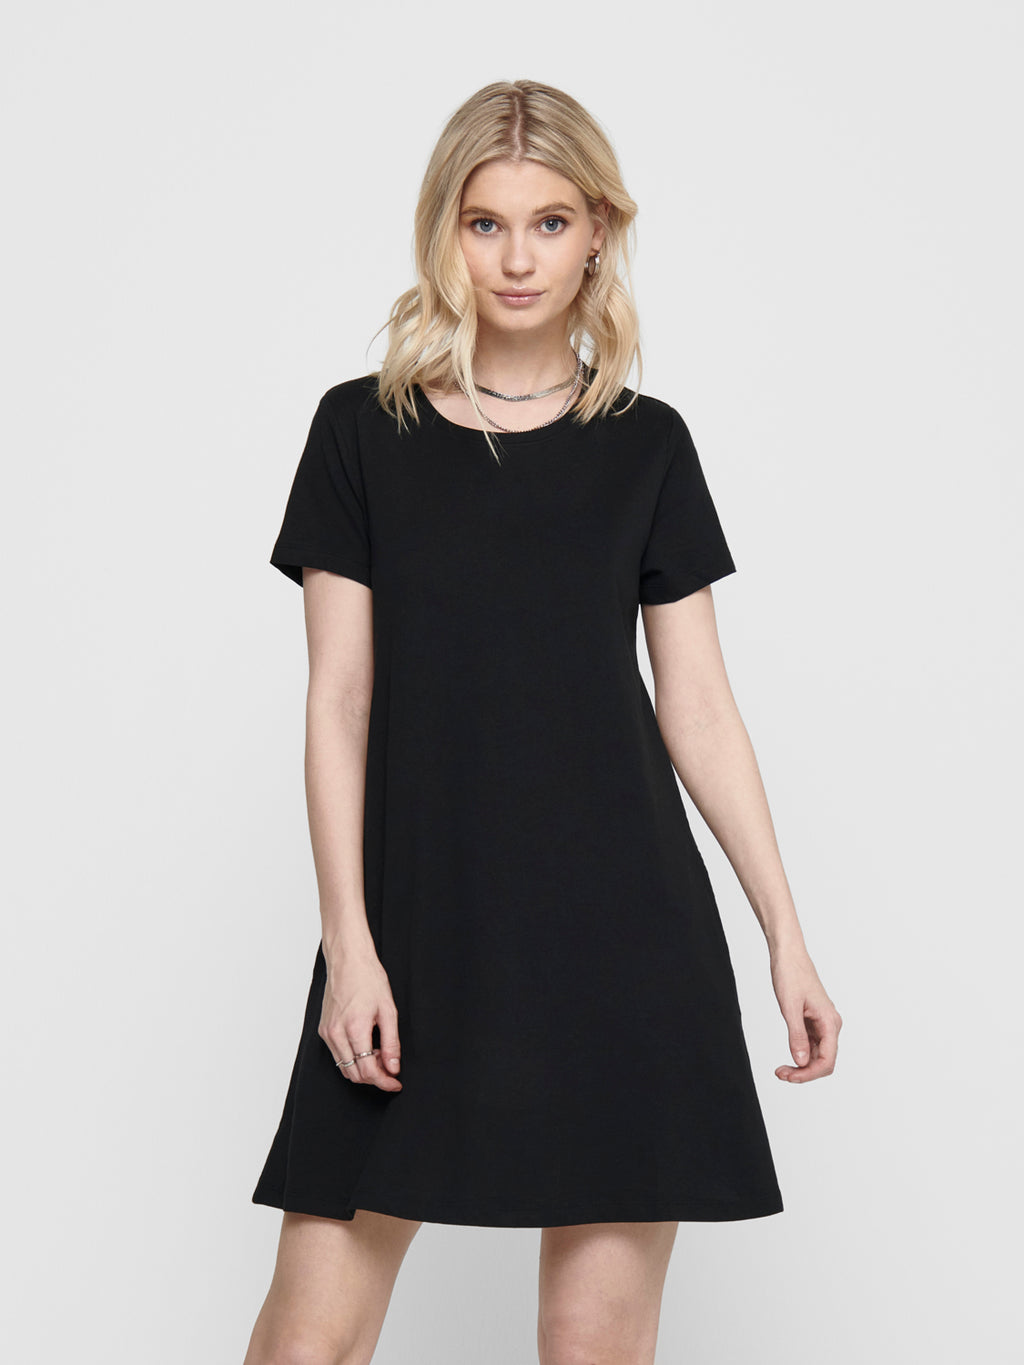 May Pocket Tee Dress- Only